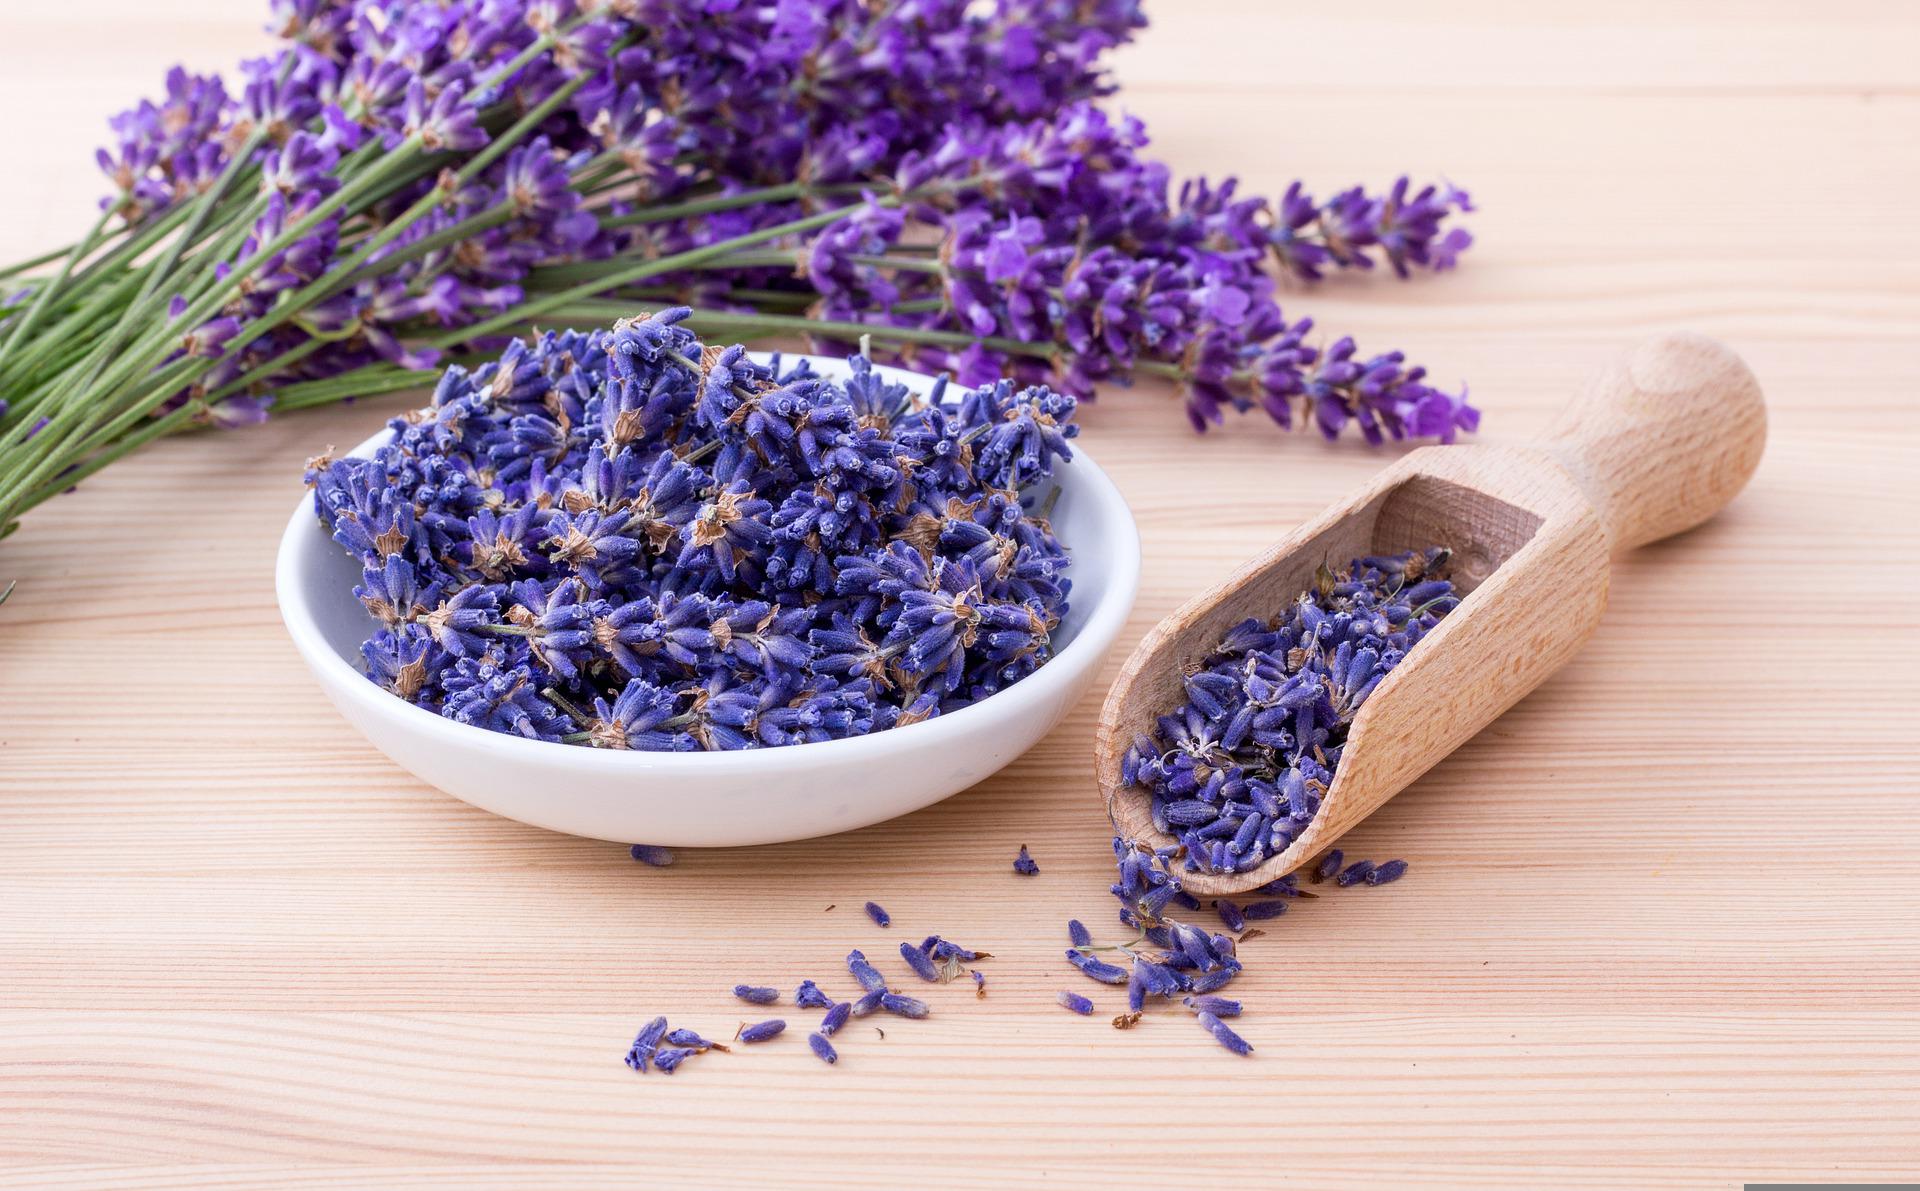 Image of lavender for drying and use in potpourri. 